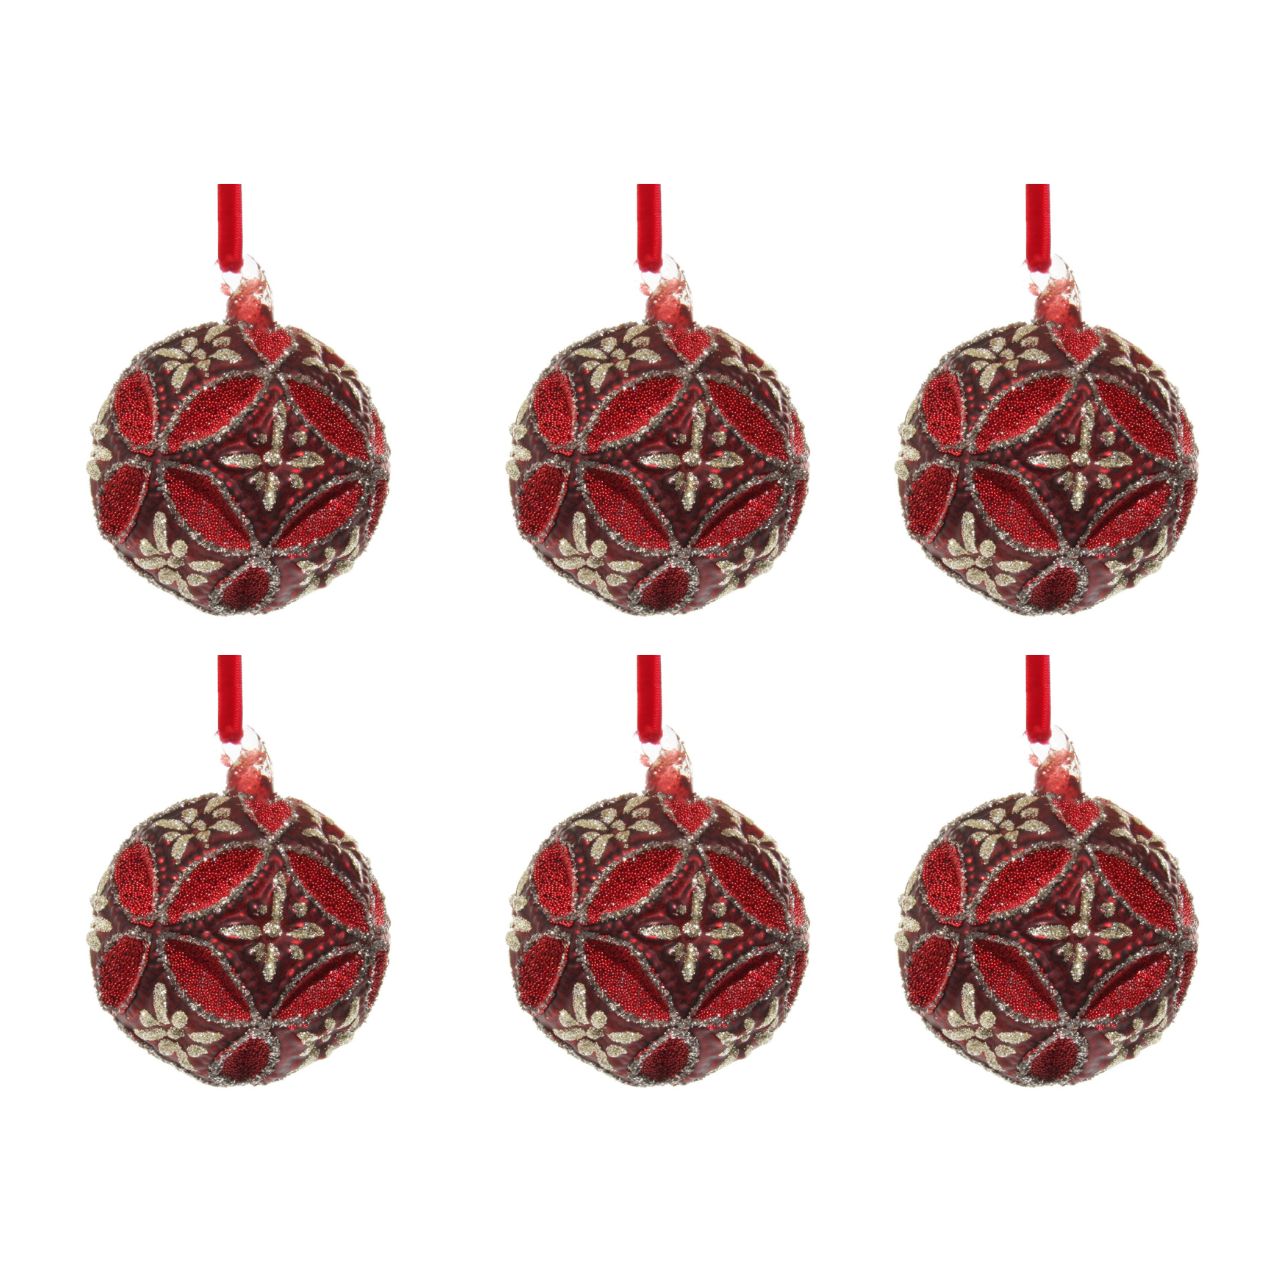 Shishi Burgundy Glass Floral Jewel Ball with Silver Glitter - Set of 6  Browse our beautiful range of luxury festive Christmas tree decorations, baubles & ornaments for your tree this Christmas.